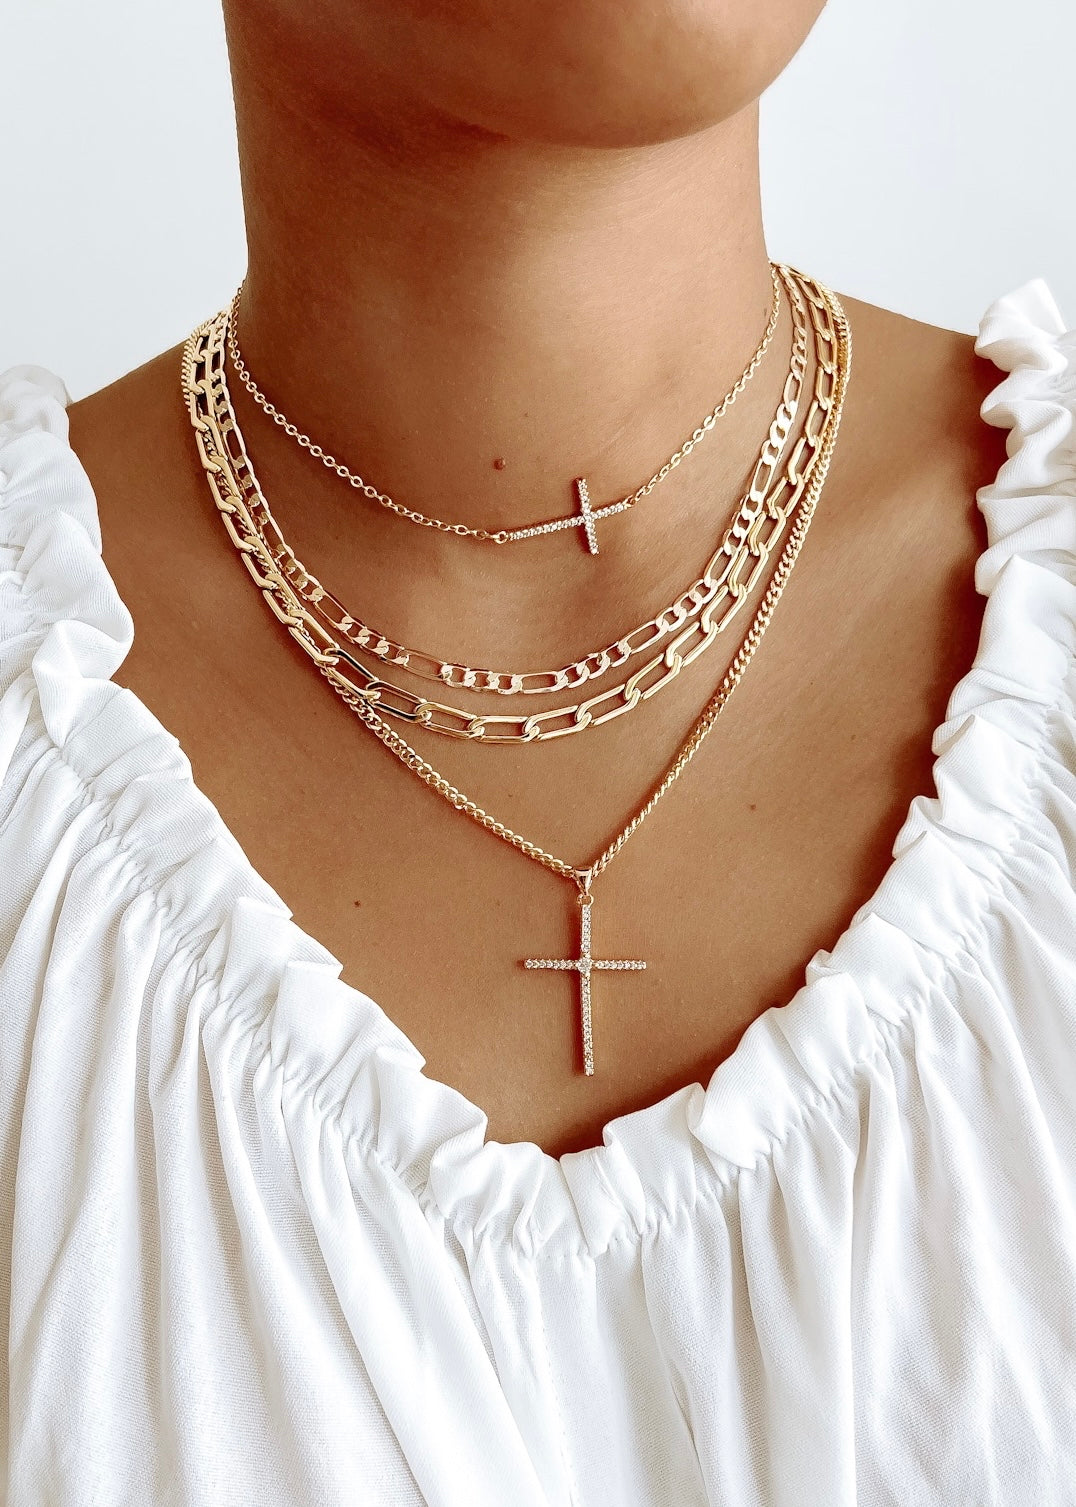 Faith Cross Necklace - Gold Filled